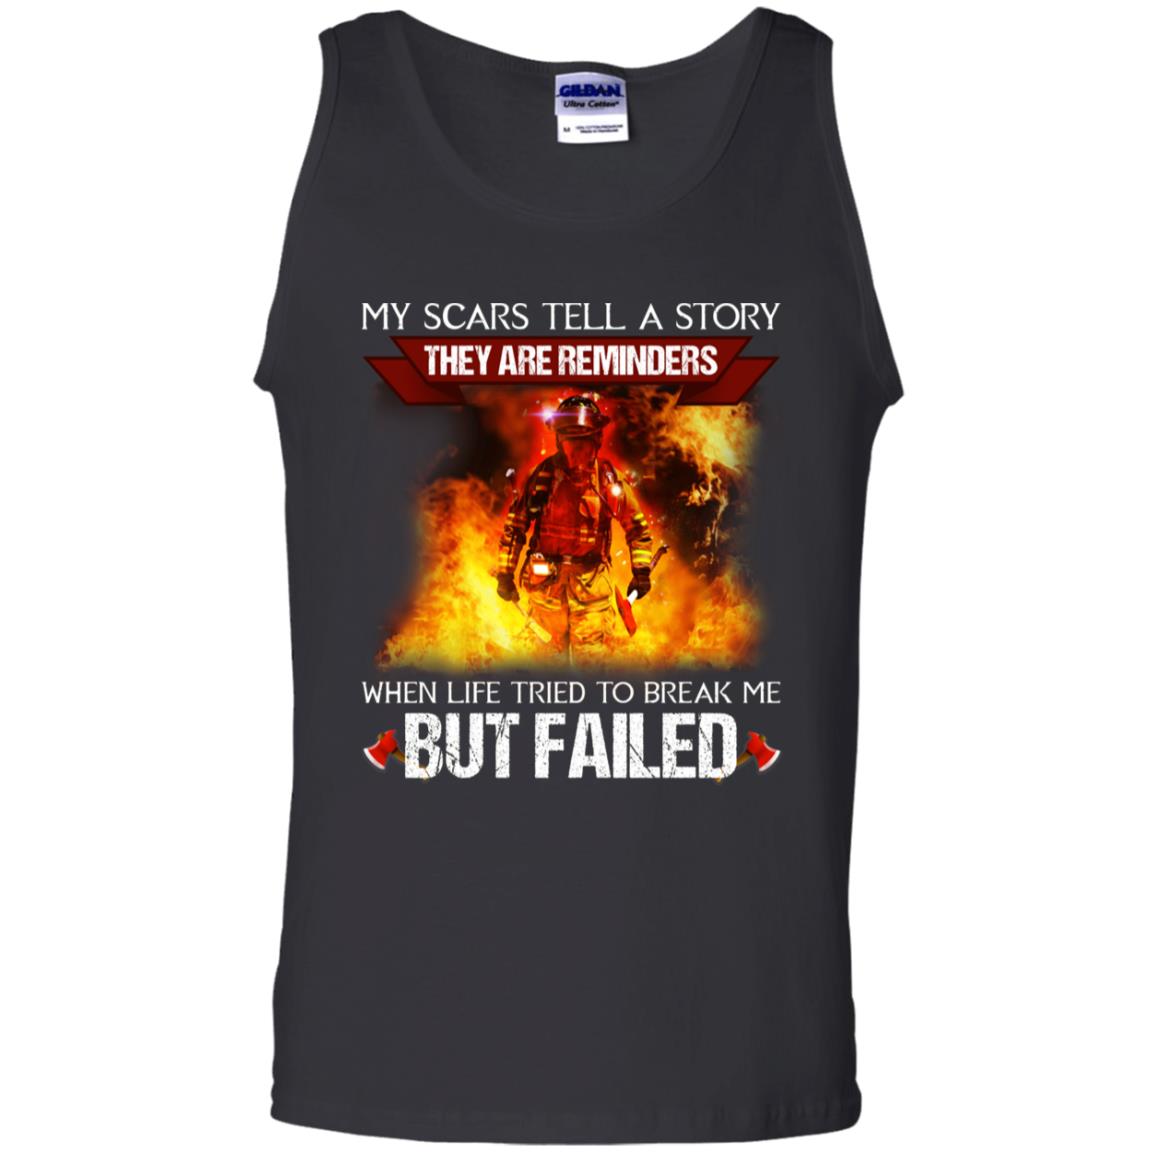 My Scars Tell A Story They Are Reminders When Life Tried To Break Me But Failed ShirtG220 Gildan 100% Cotton Tank Top